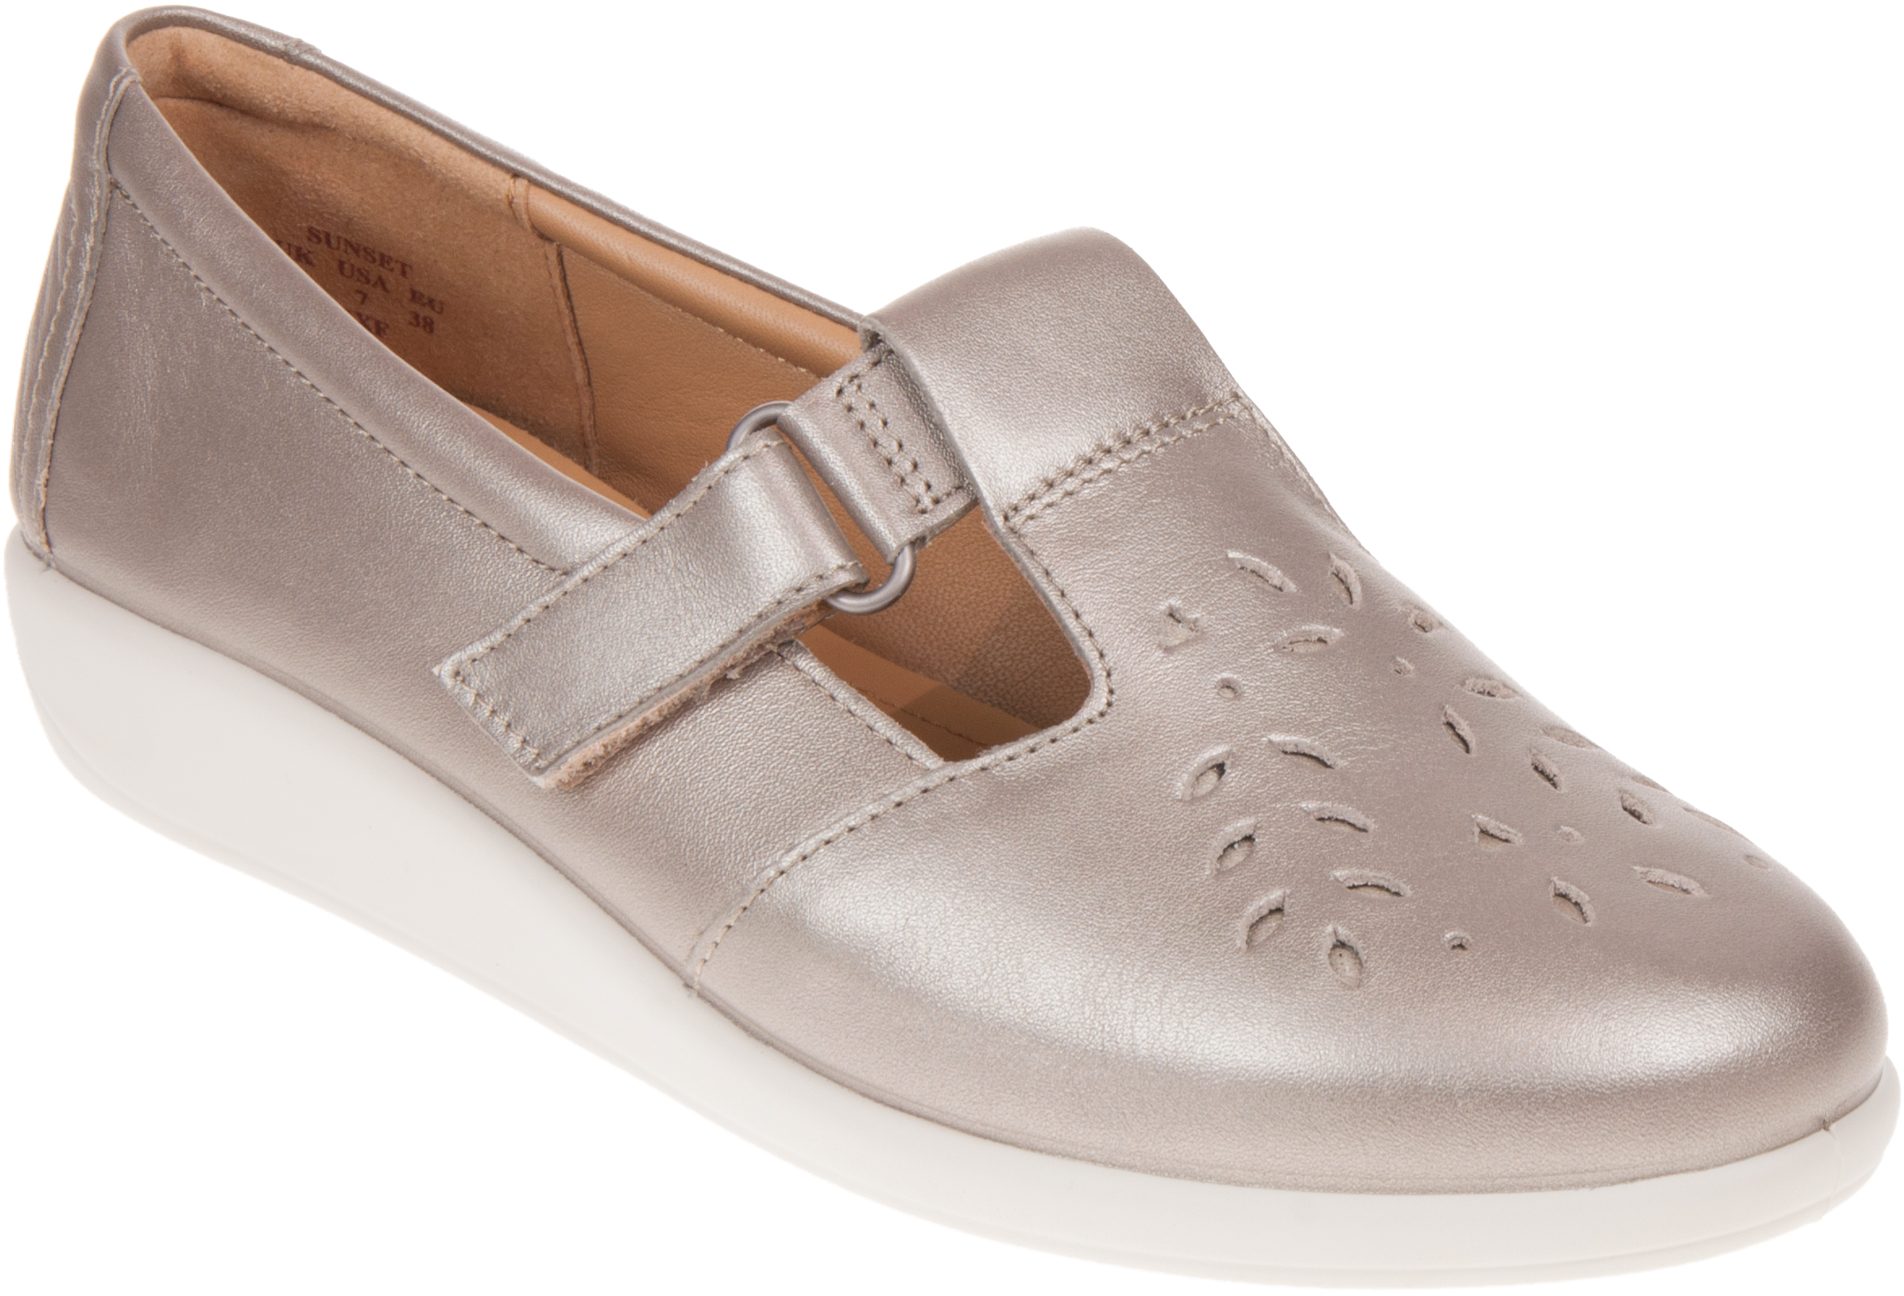 Hotter Sunset Nickel Metallic Leather SUNST3 - Everyday Shoes ...